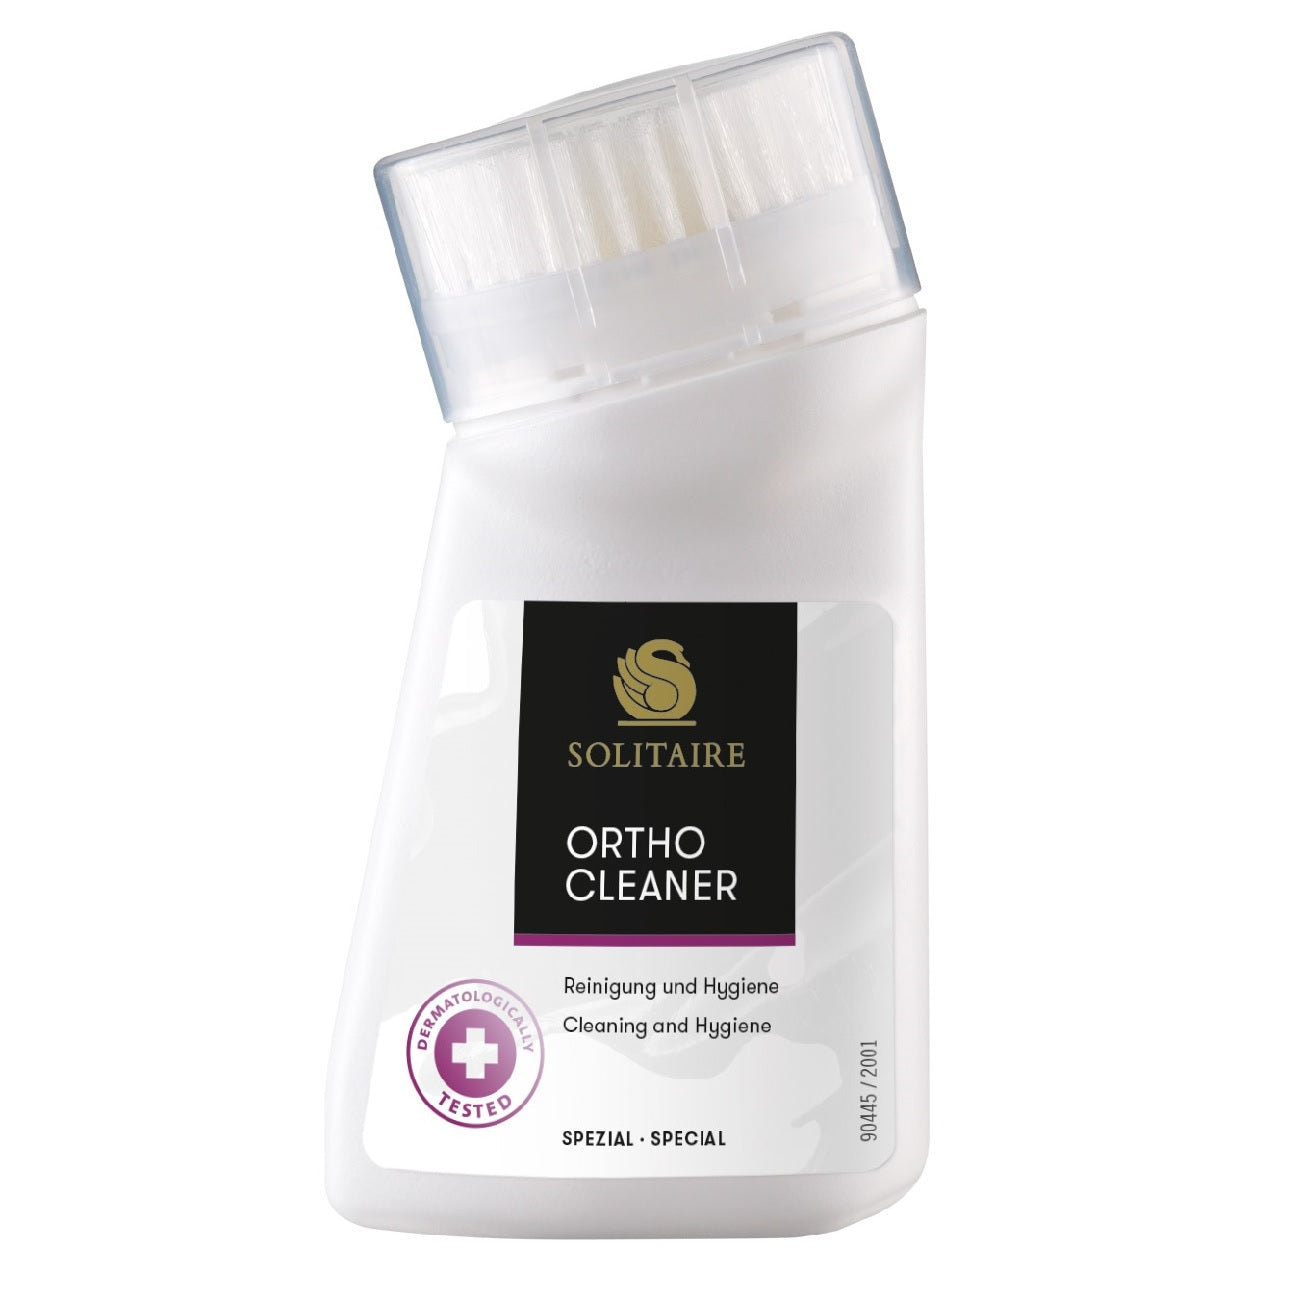 Solitaire Ortho Cleaner 75ml